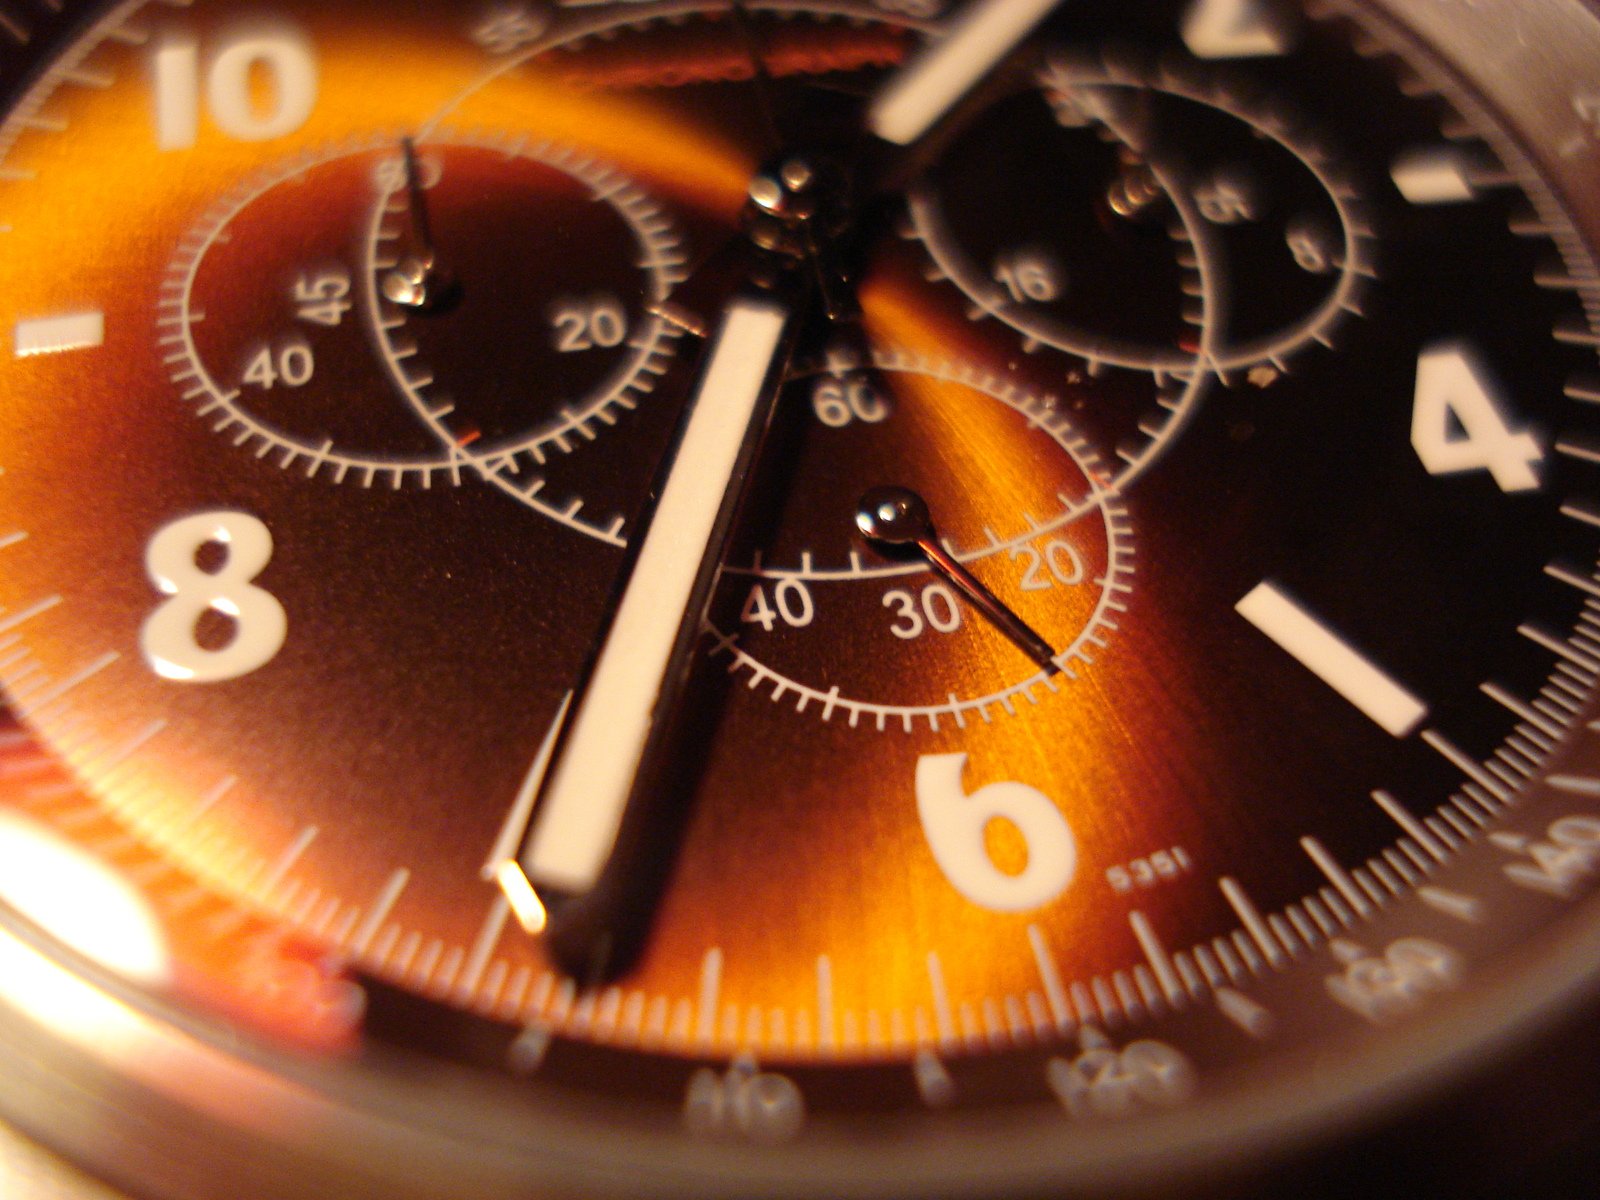 close up view of an analog chronometer watch